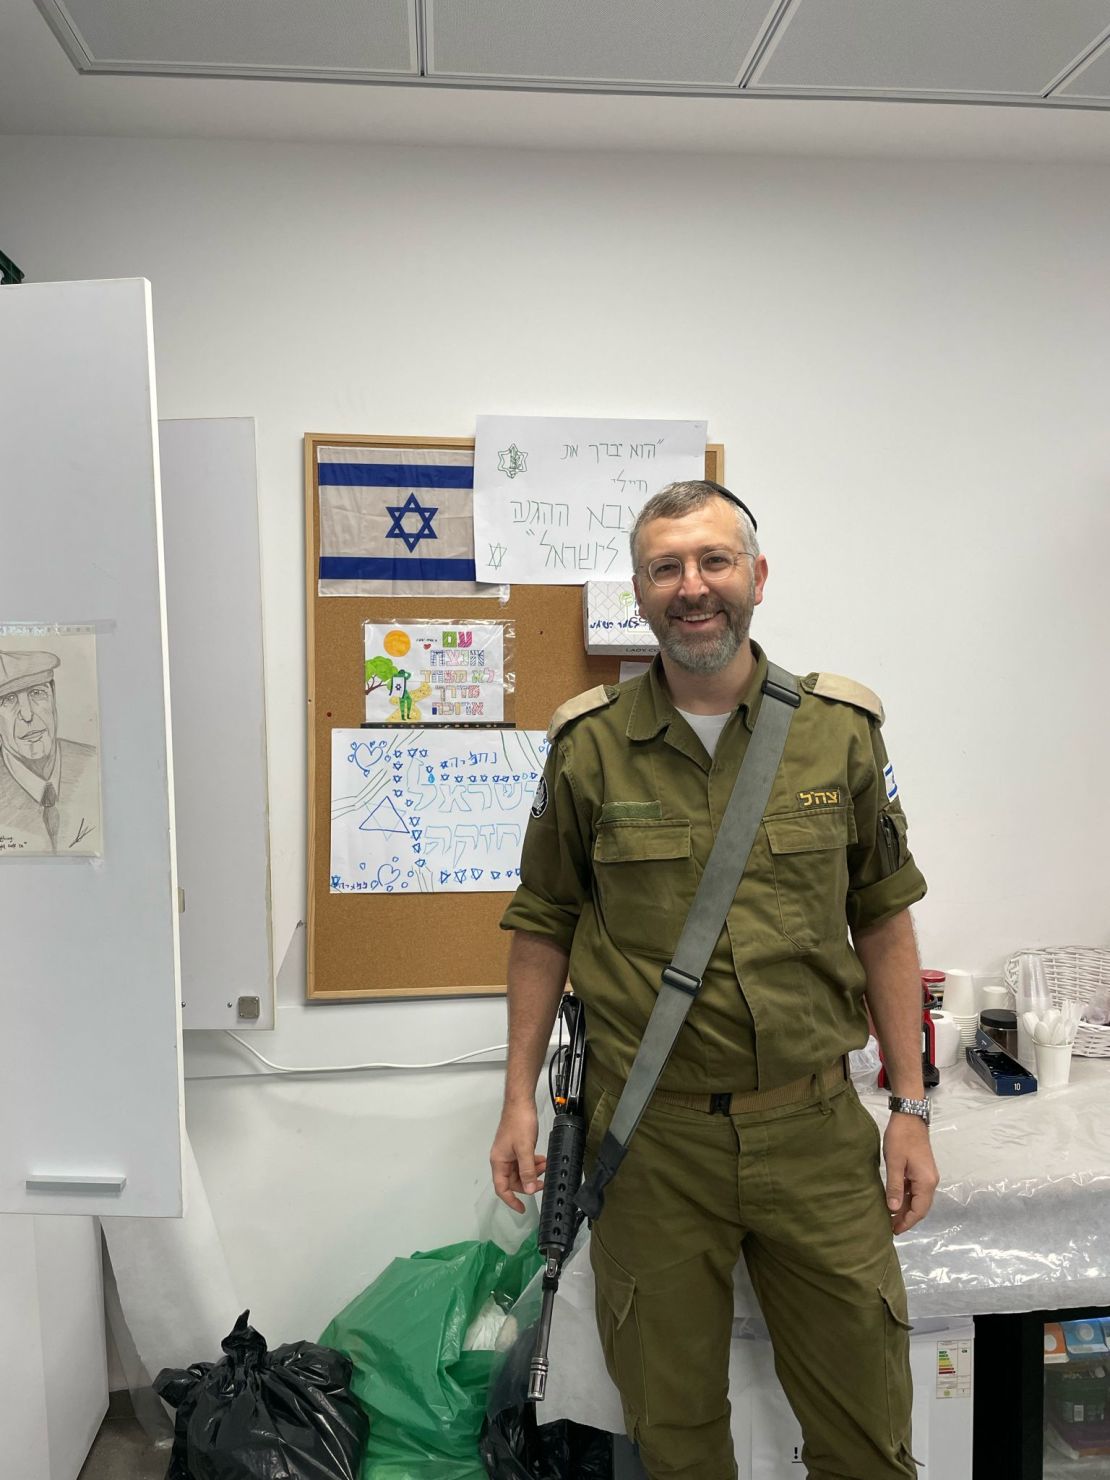 Nechemia Steinberger, a Haredi rabbi who has for years worked to integrate mainstream education into his community, signed up to the IDF in the wake of the Covid pandemic.